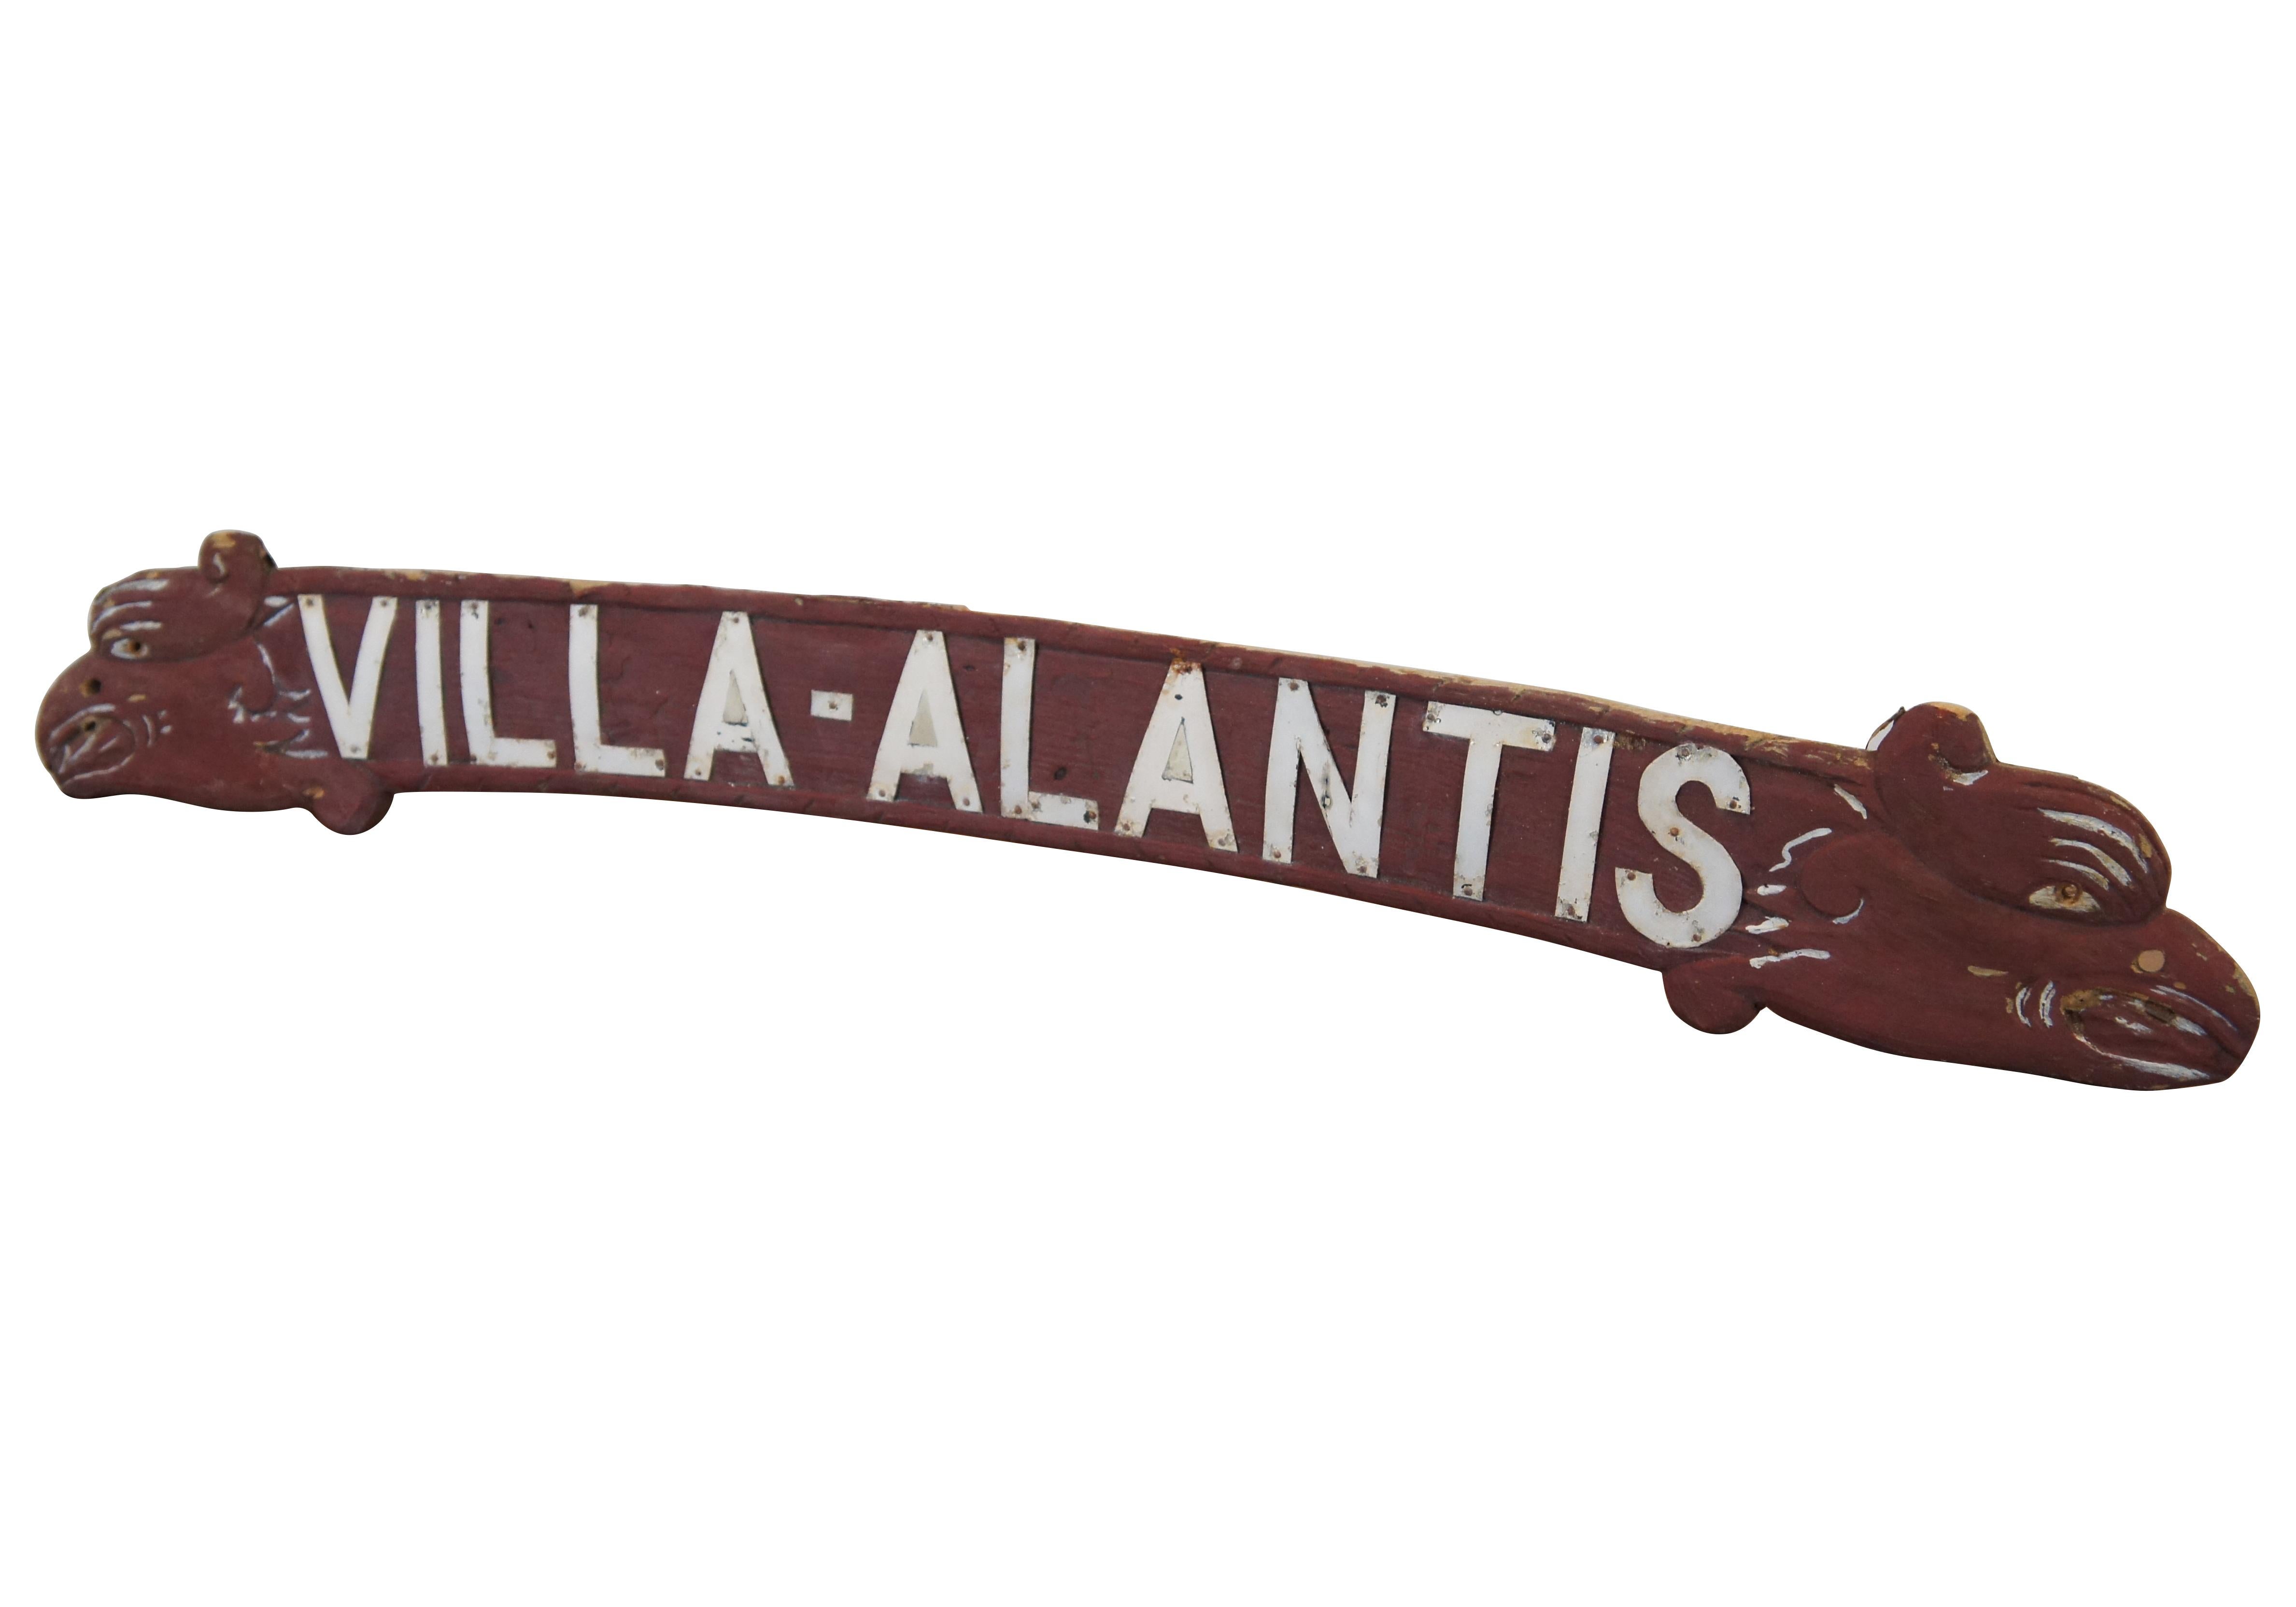 Vintage folk art carved wood advertising sign with white metal lettering for Villa-Atlantis, featuring a slightly curved form tipped with the heads of dragons, sea serpents or eagles / gryphons. Measure: 42